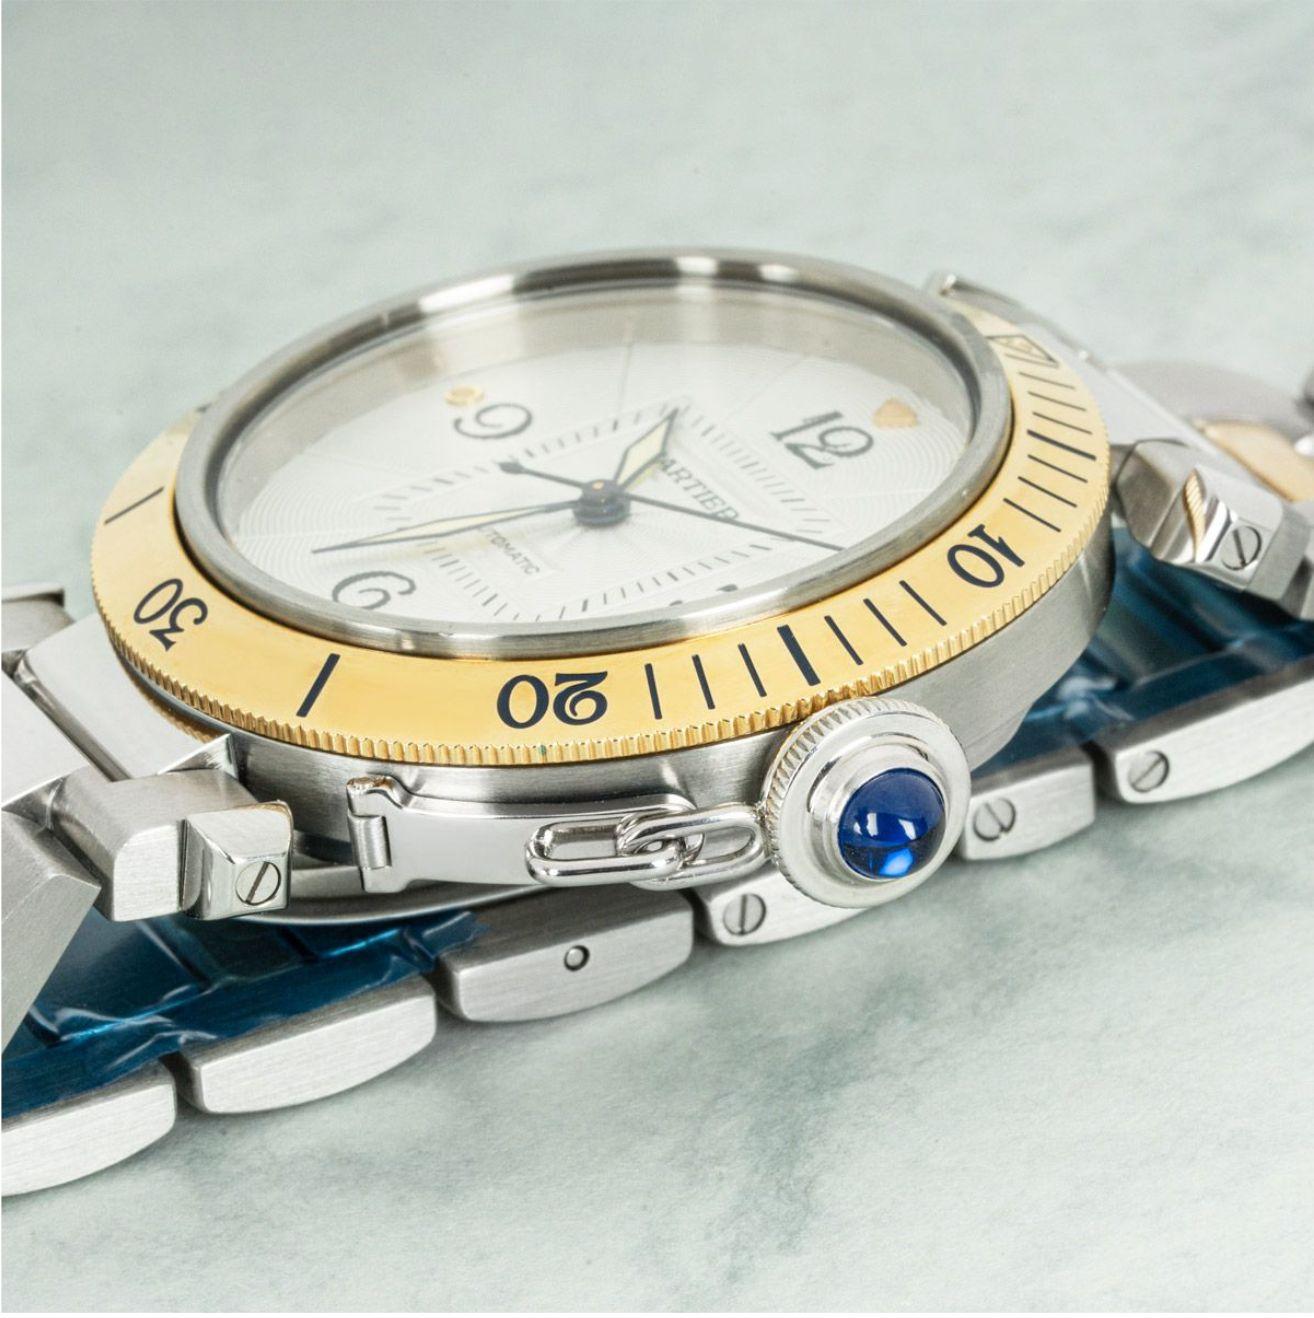 A mens 38mm stainless steel and yellow gold Pasha by Cartier. Featuring a silver guilloche dial with a date aperture and sword-shaped hands in blued steel. The crown is protected by a screw-down cover which is set with a sapphire cabochon.

Equipped